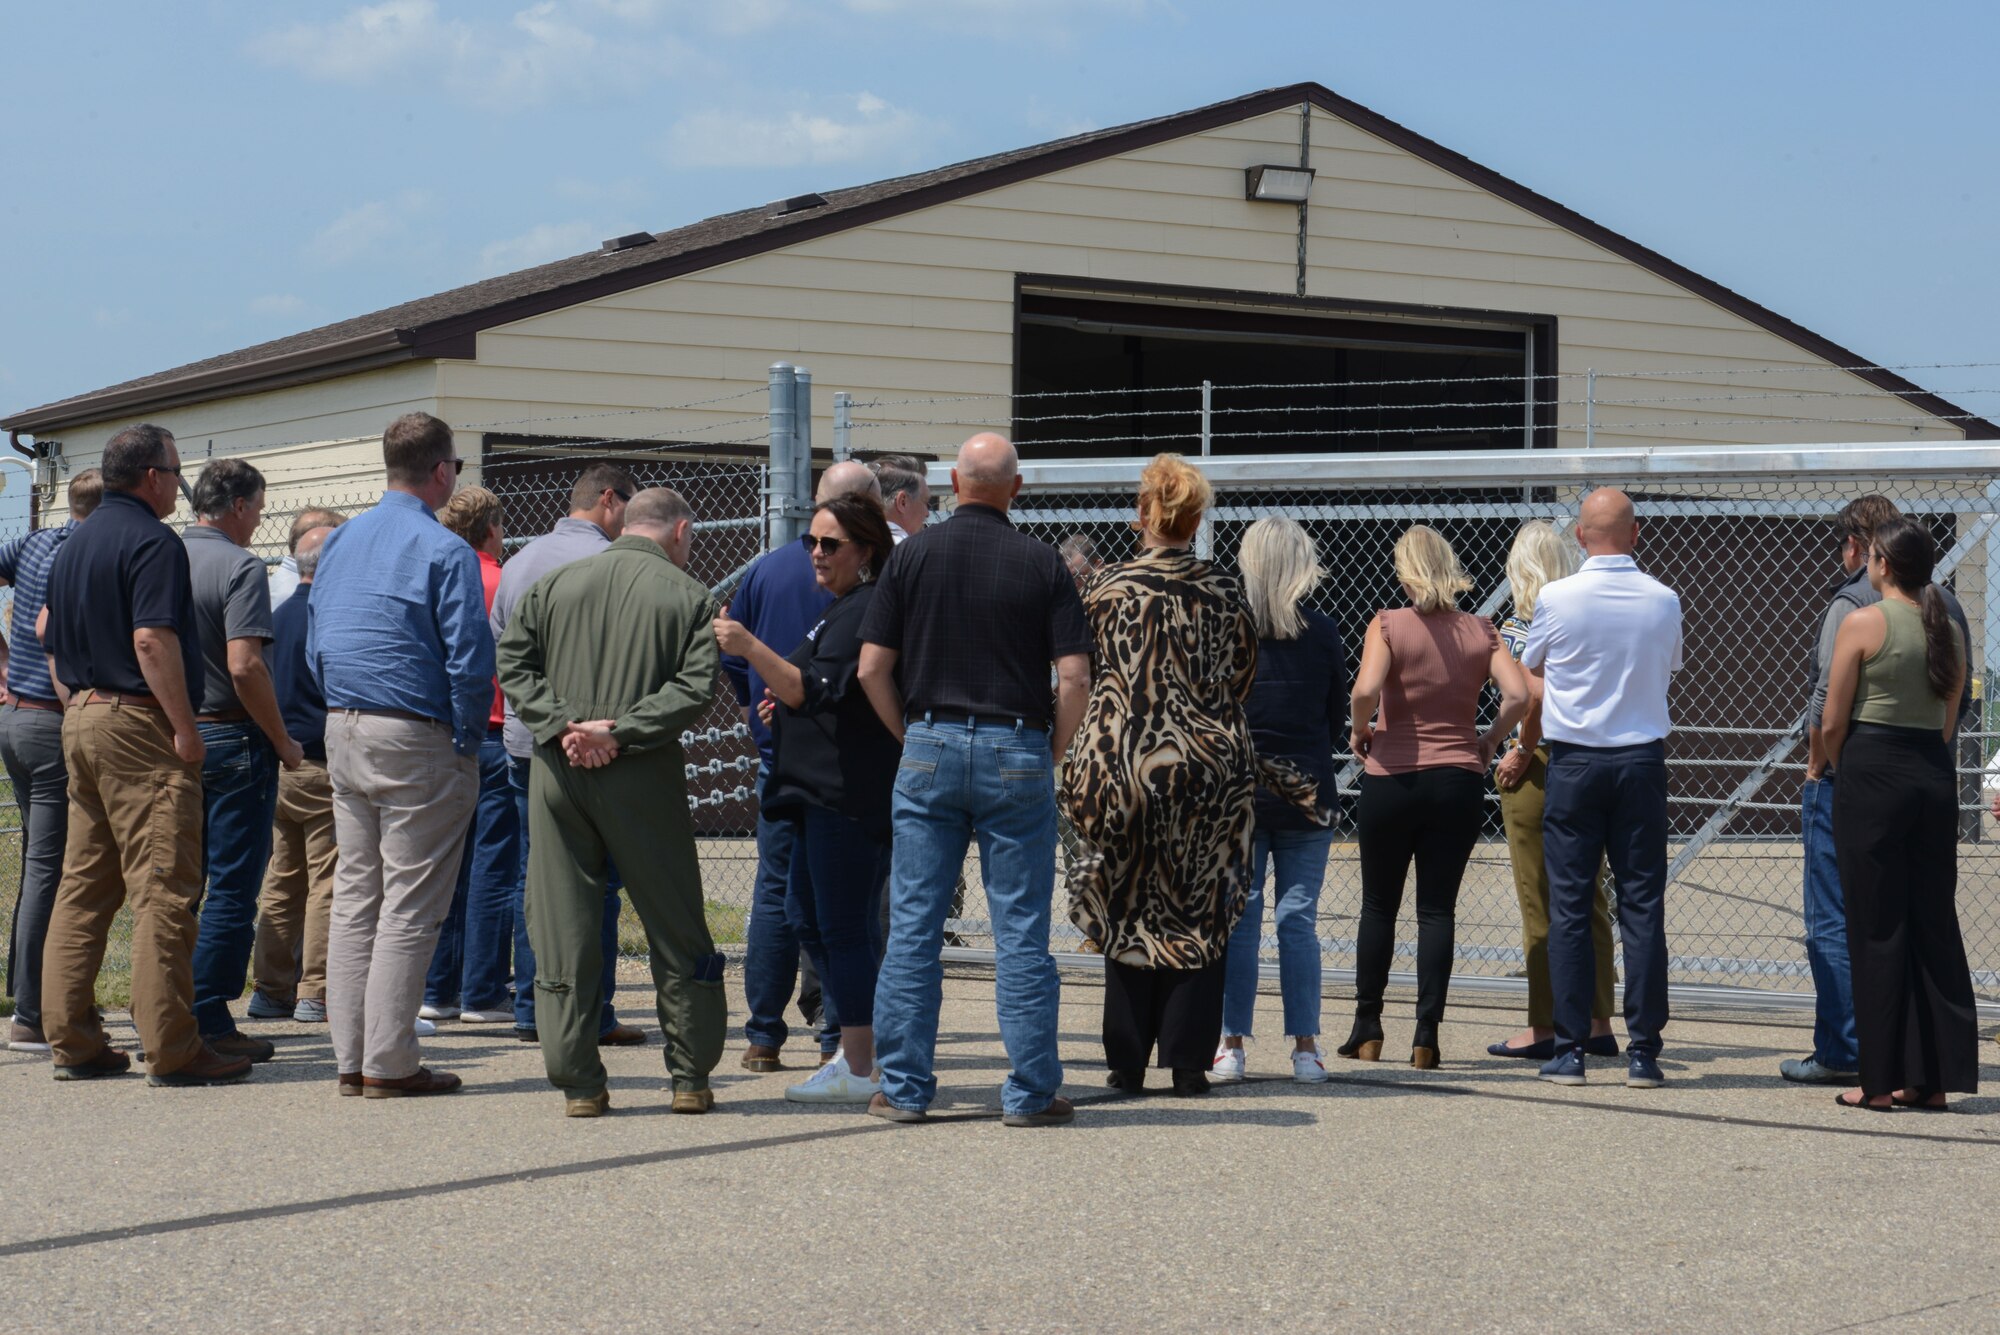 Civic Leaders wait behind the fence of a Missile Alert Facility, Minot Air Force Base, North Dakota, July 13, 2023. MAFs are the link to the launch control centers connected via computer to intercontinental ballistic missiles. (U.S. Air Force photo by Airman 1st Class Trust Tate)